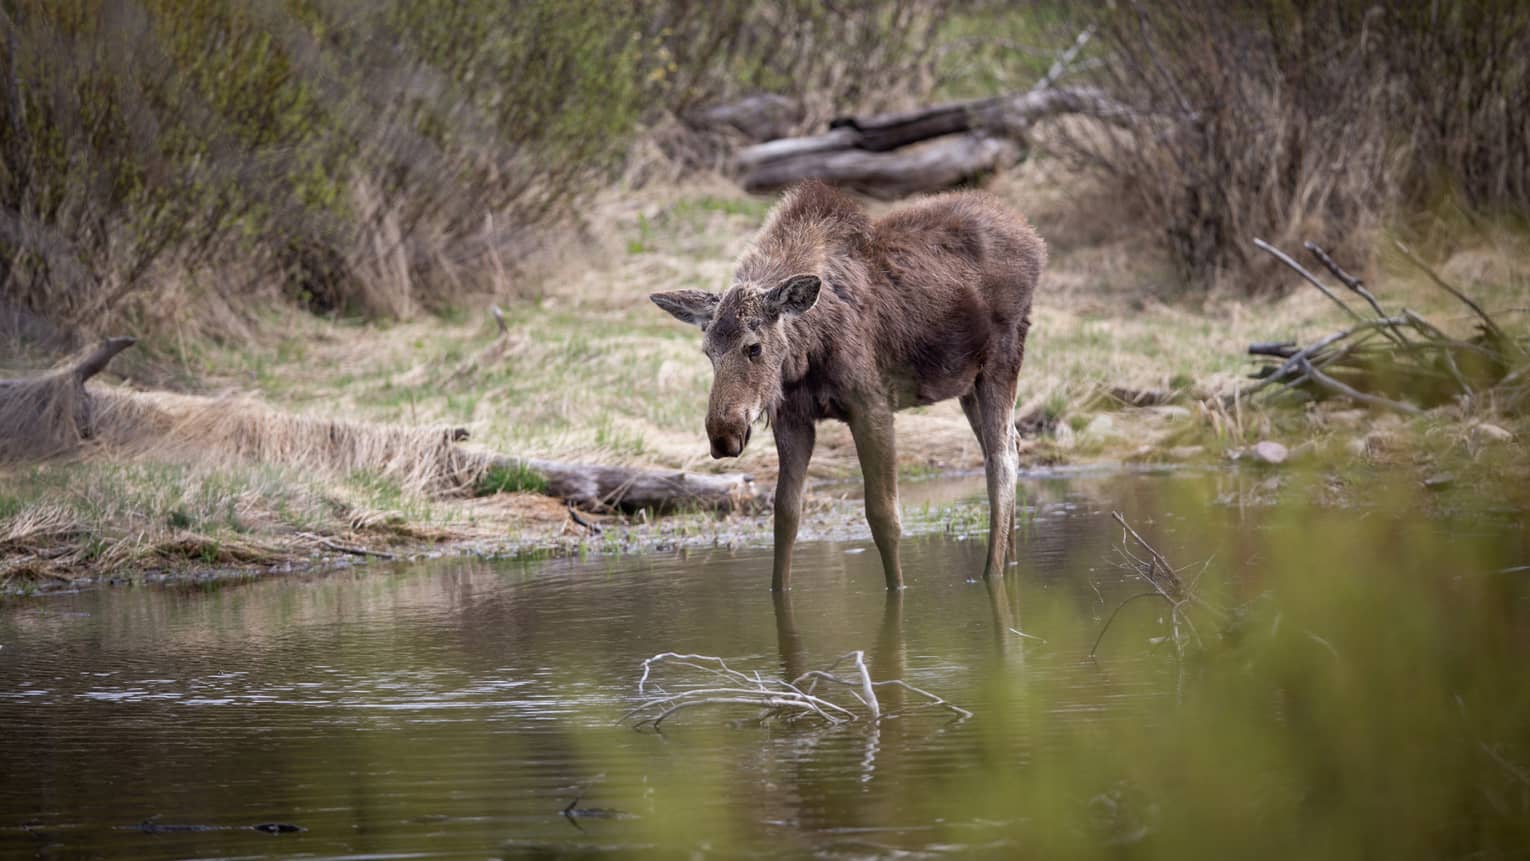 Moose stands in river near grassy shore